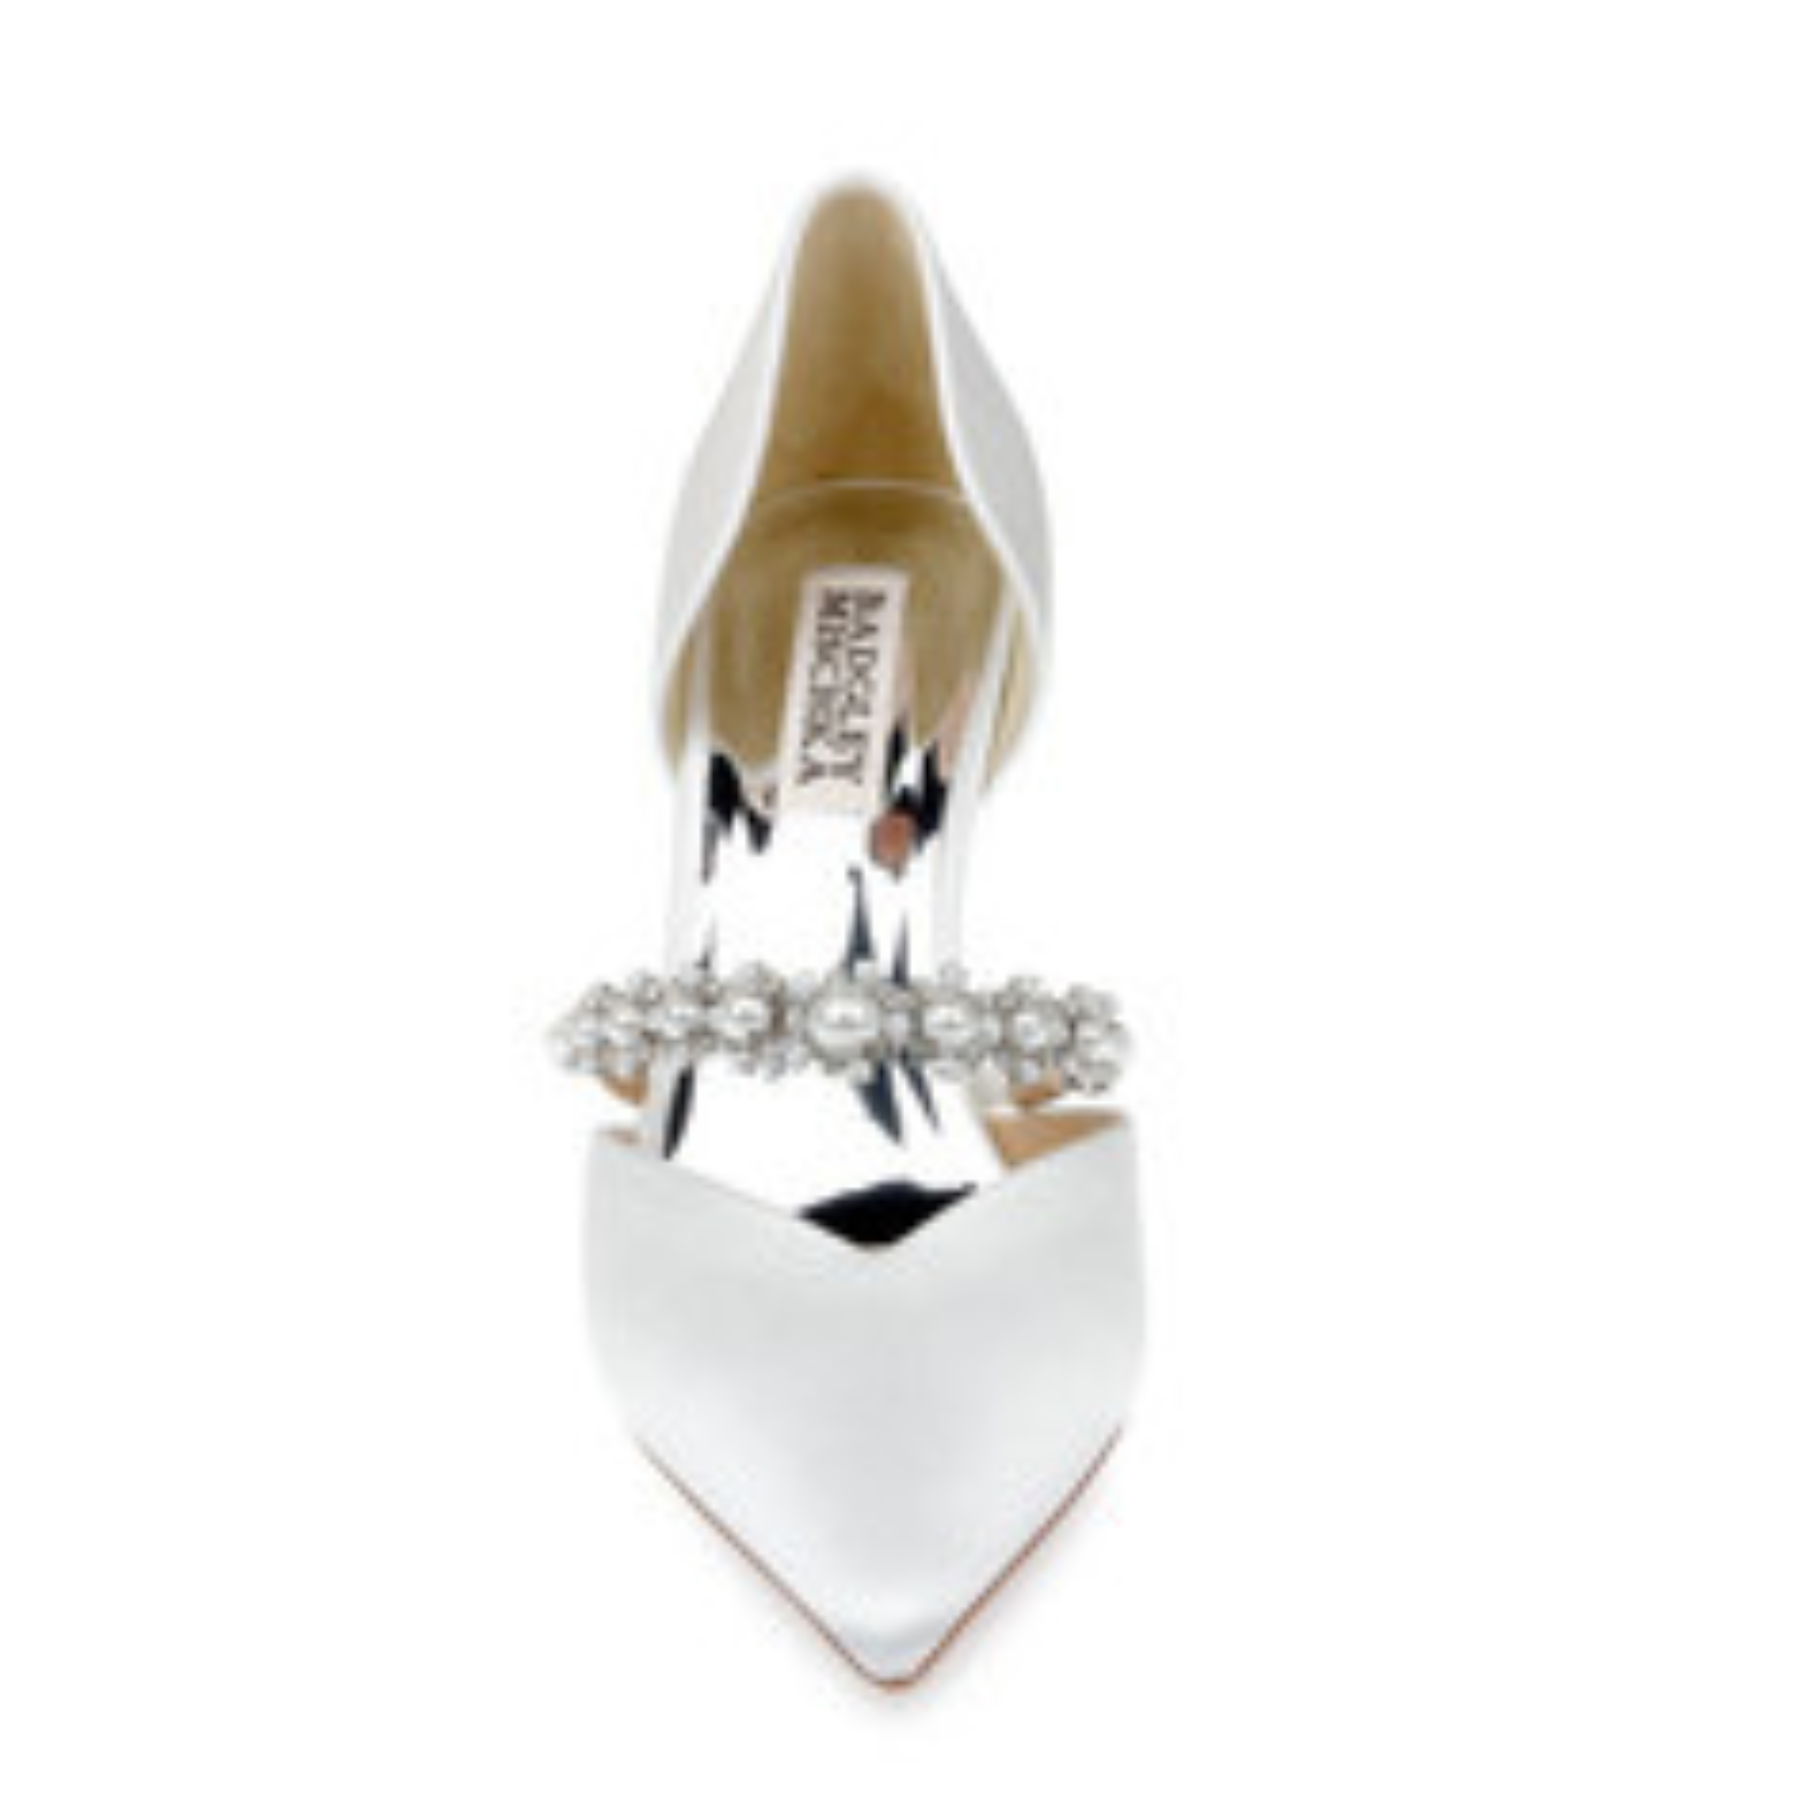 Nathalie - Satin Pointed Toe Stiletto With Crystal & Pearl Strap - White